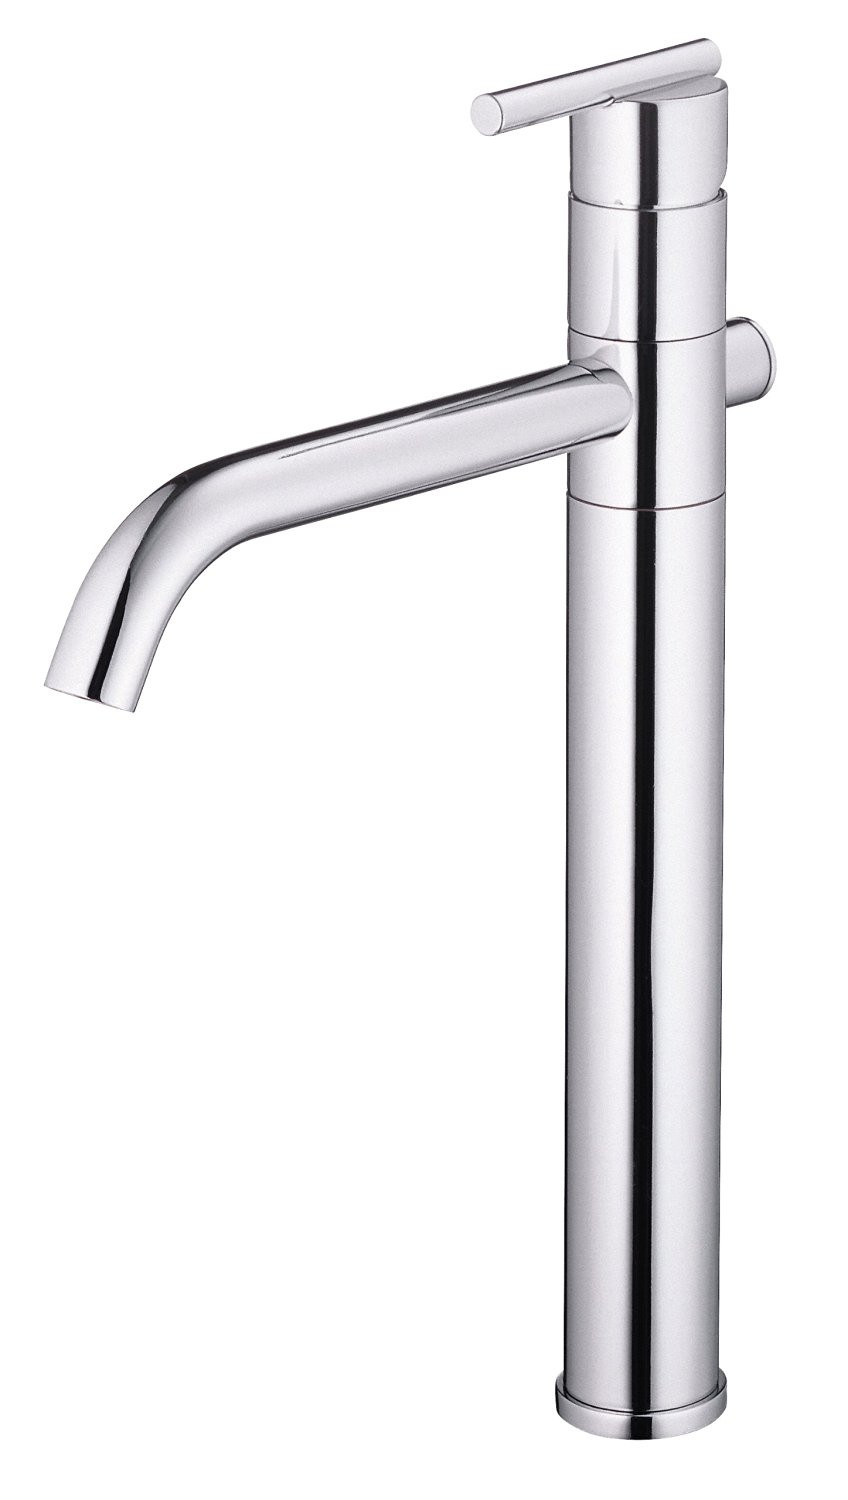 Danze D225158 Parma™ Single Hole Faucet With Metal Grid Strainer In Chrome